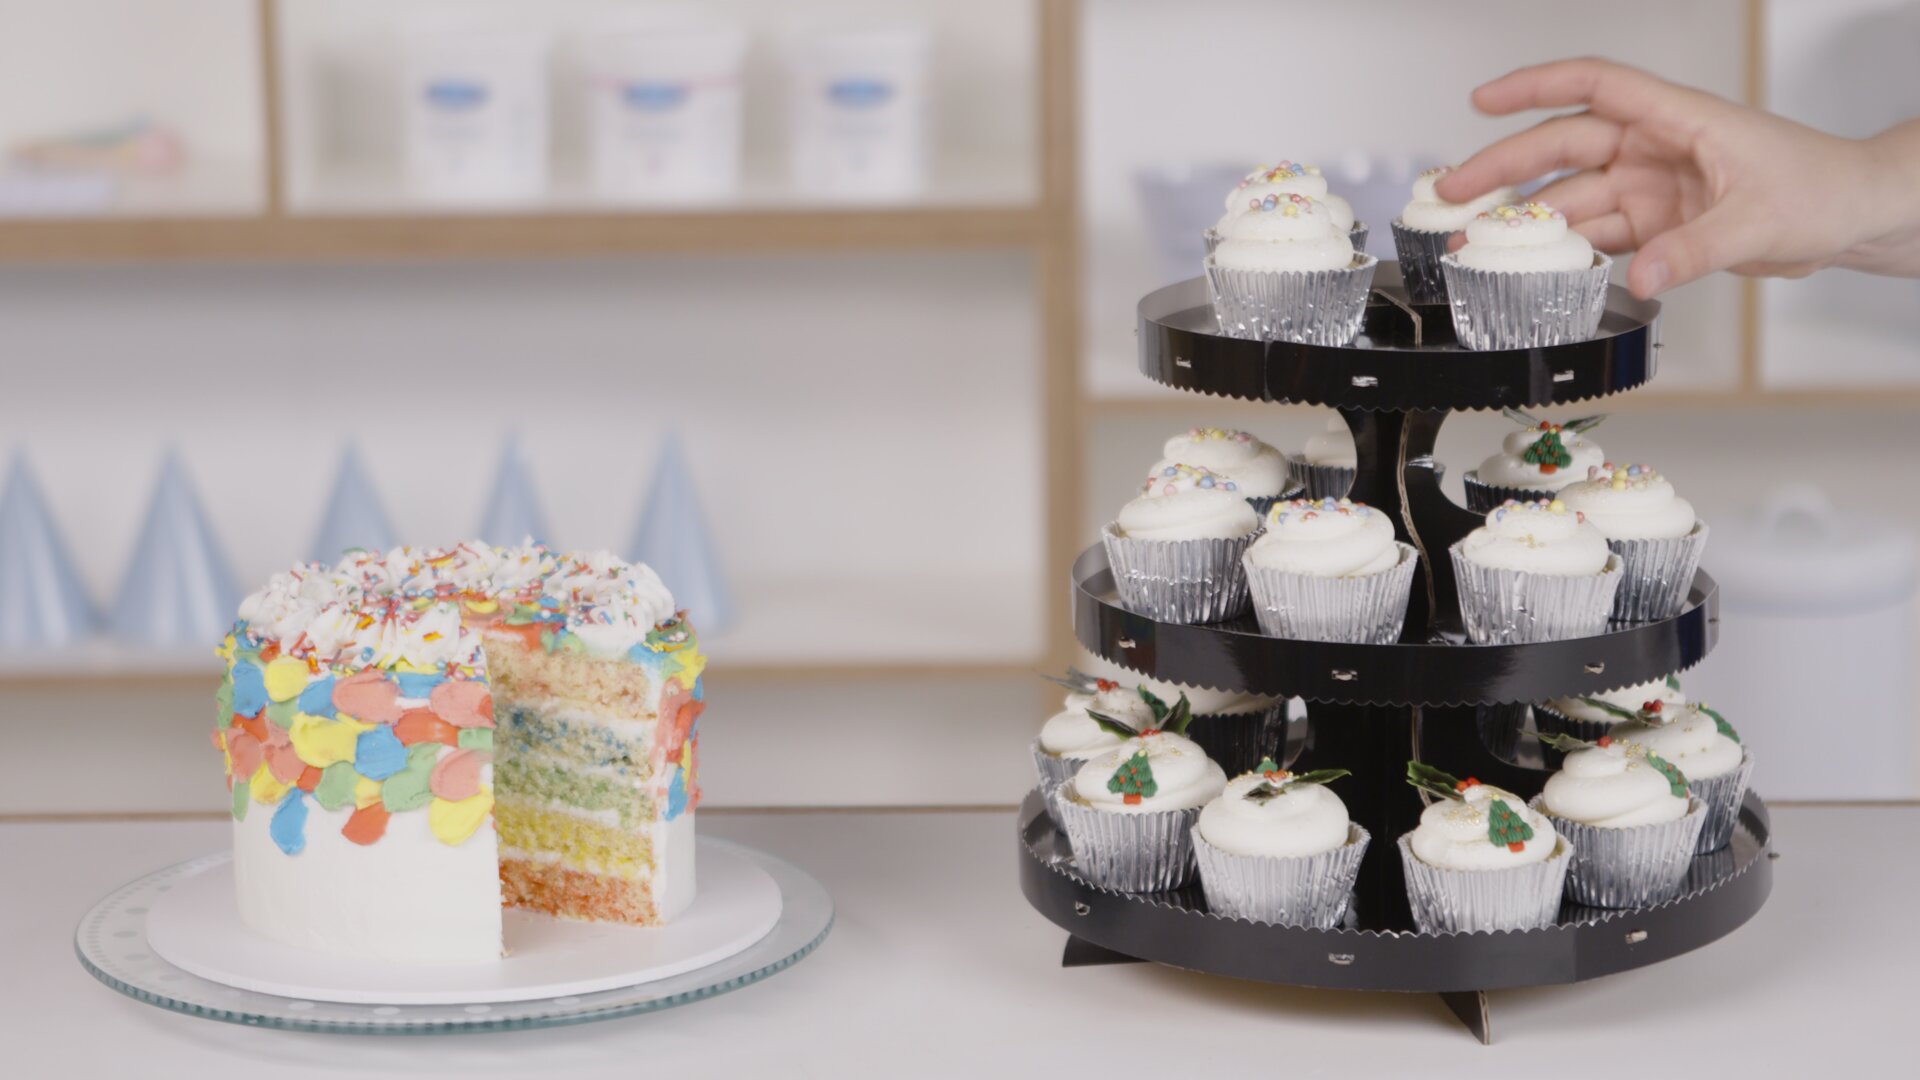 Choosing The Right Decorating Tools For Your Cakes